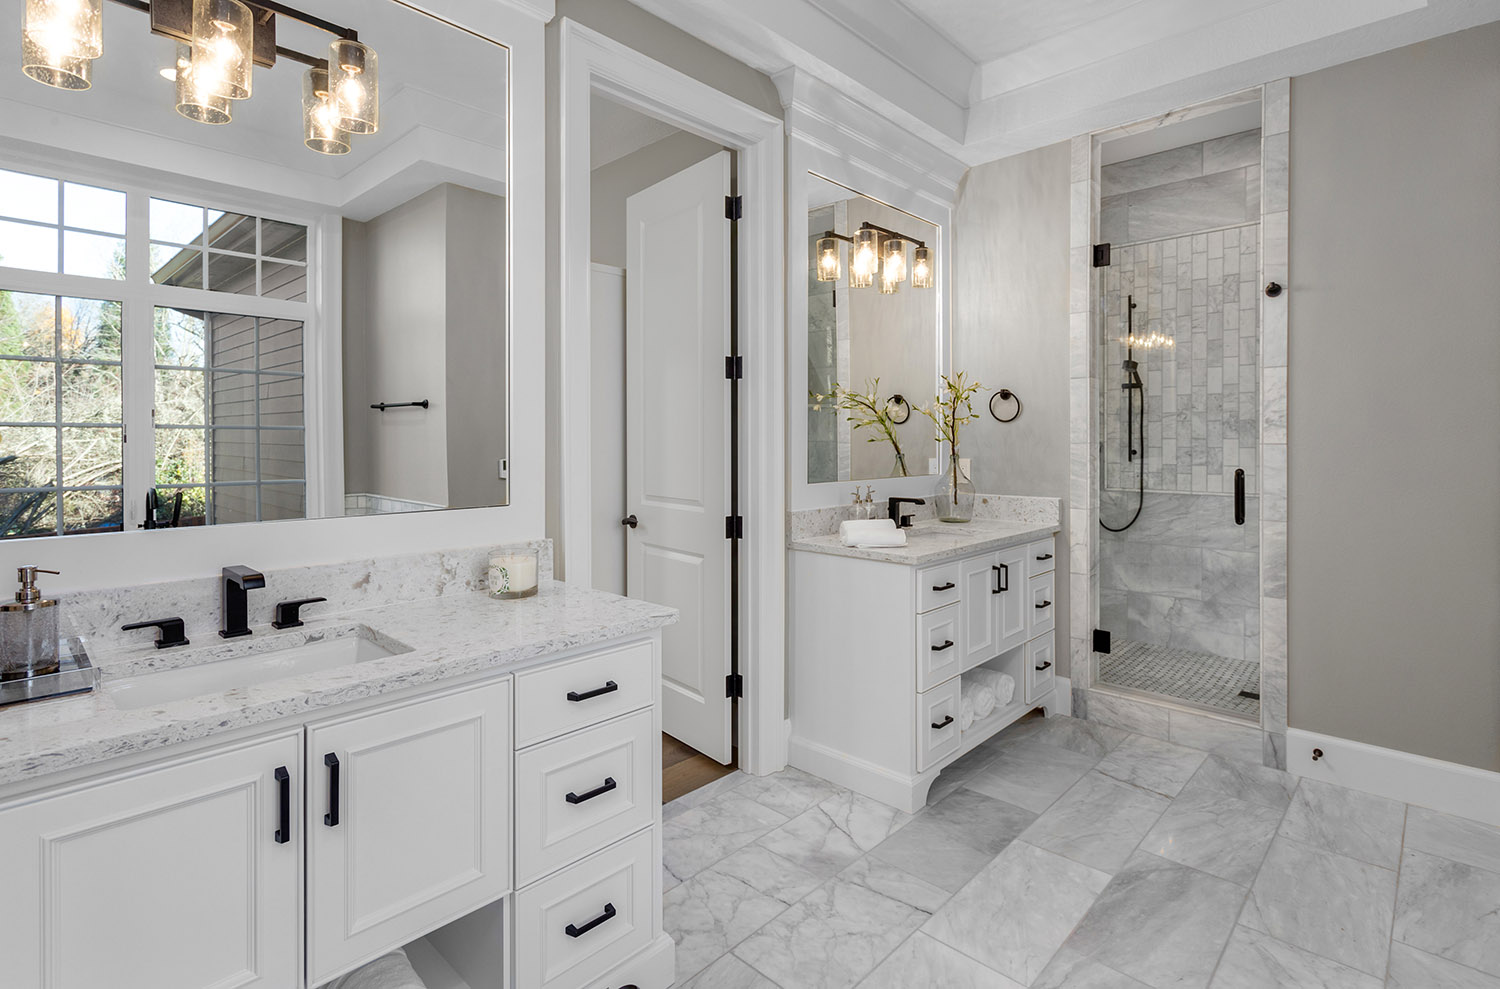 Beautiful bathroom in new luxury home with two vanities and sinks.